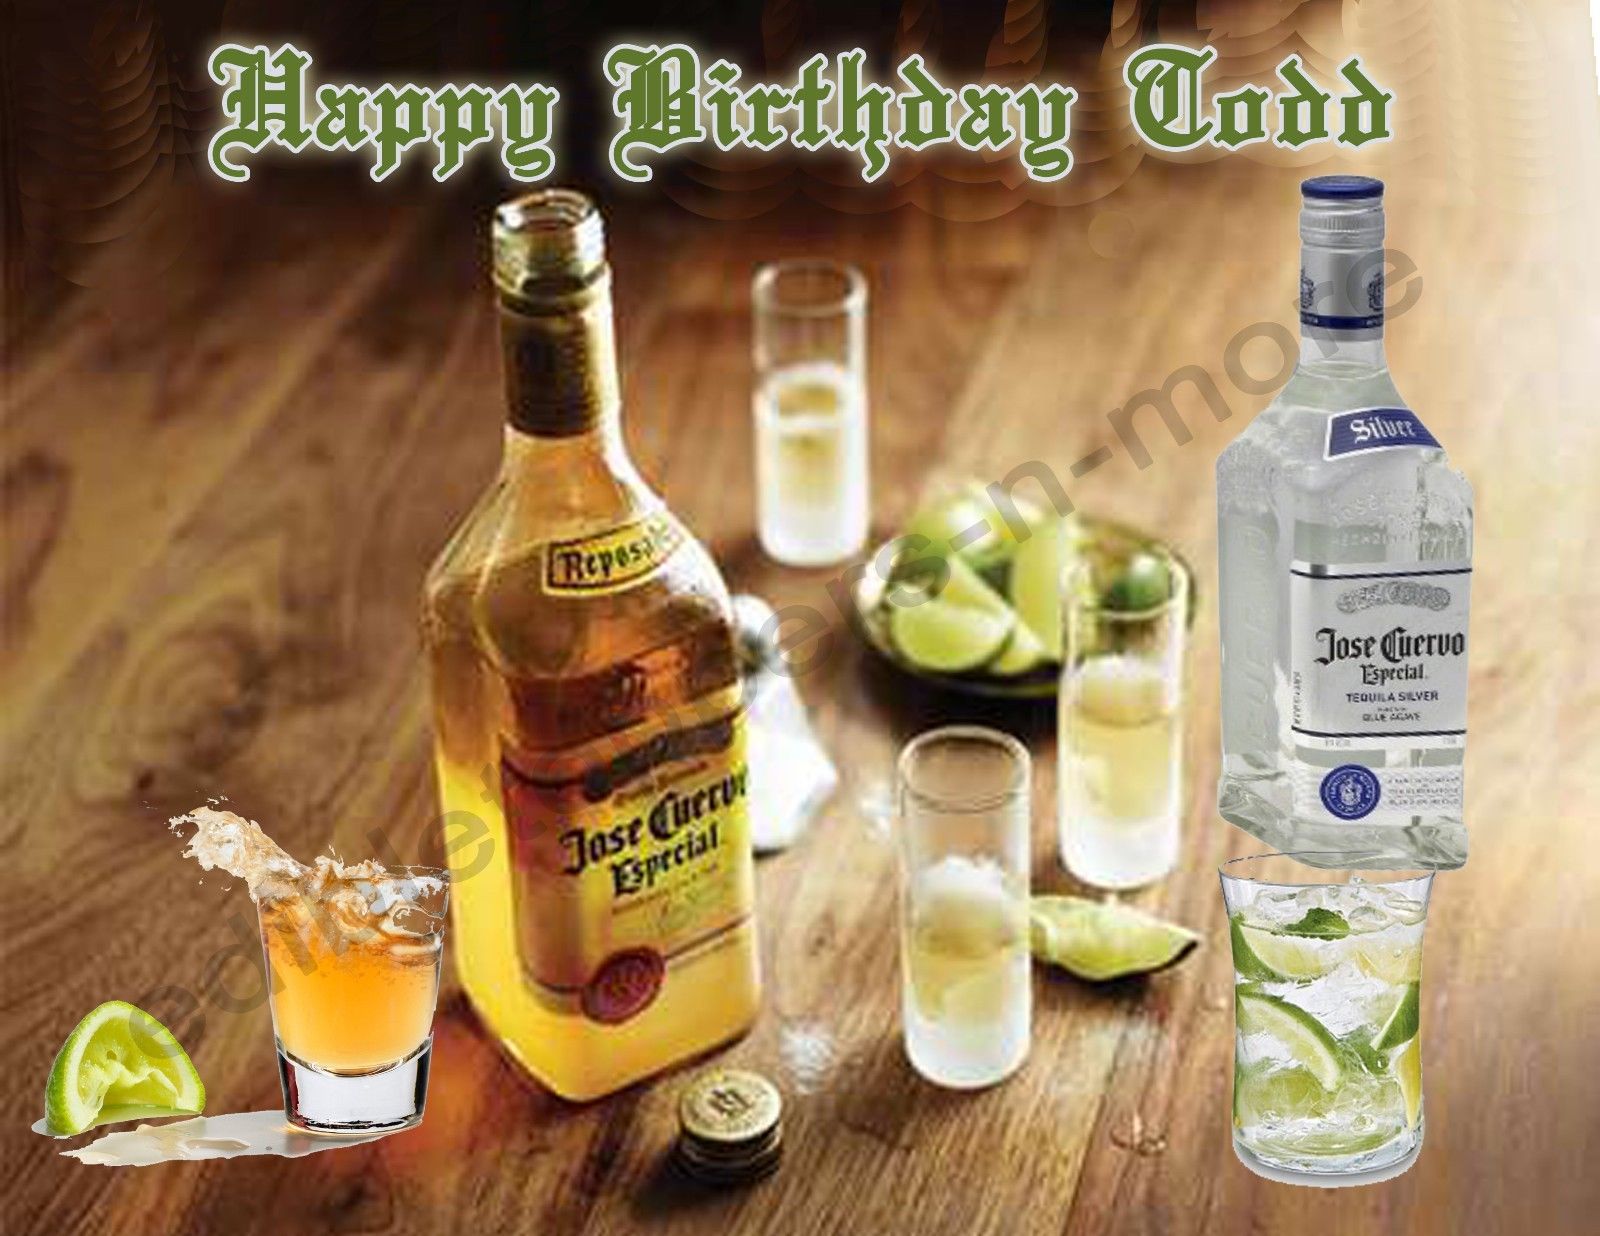 Tequila Jose Cuervo Personalized Edible Print Premium Cake Topper Frosting Sheets 5 Sizes